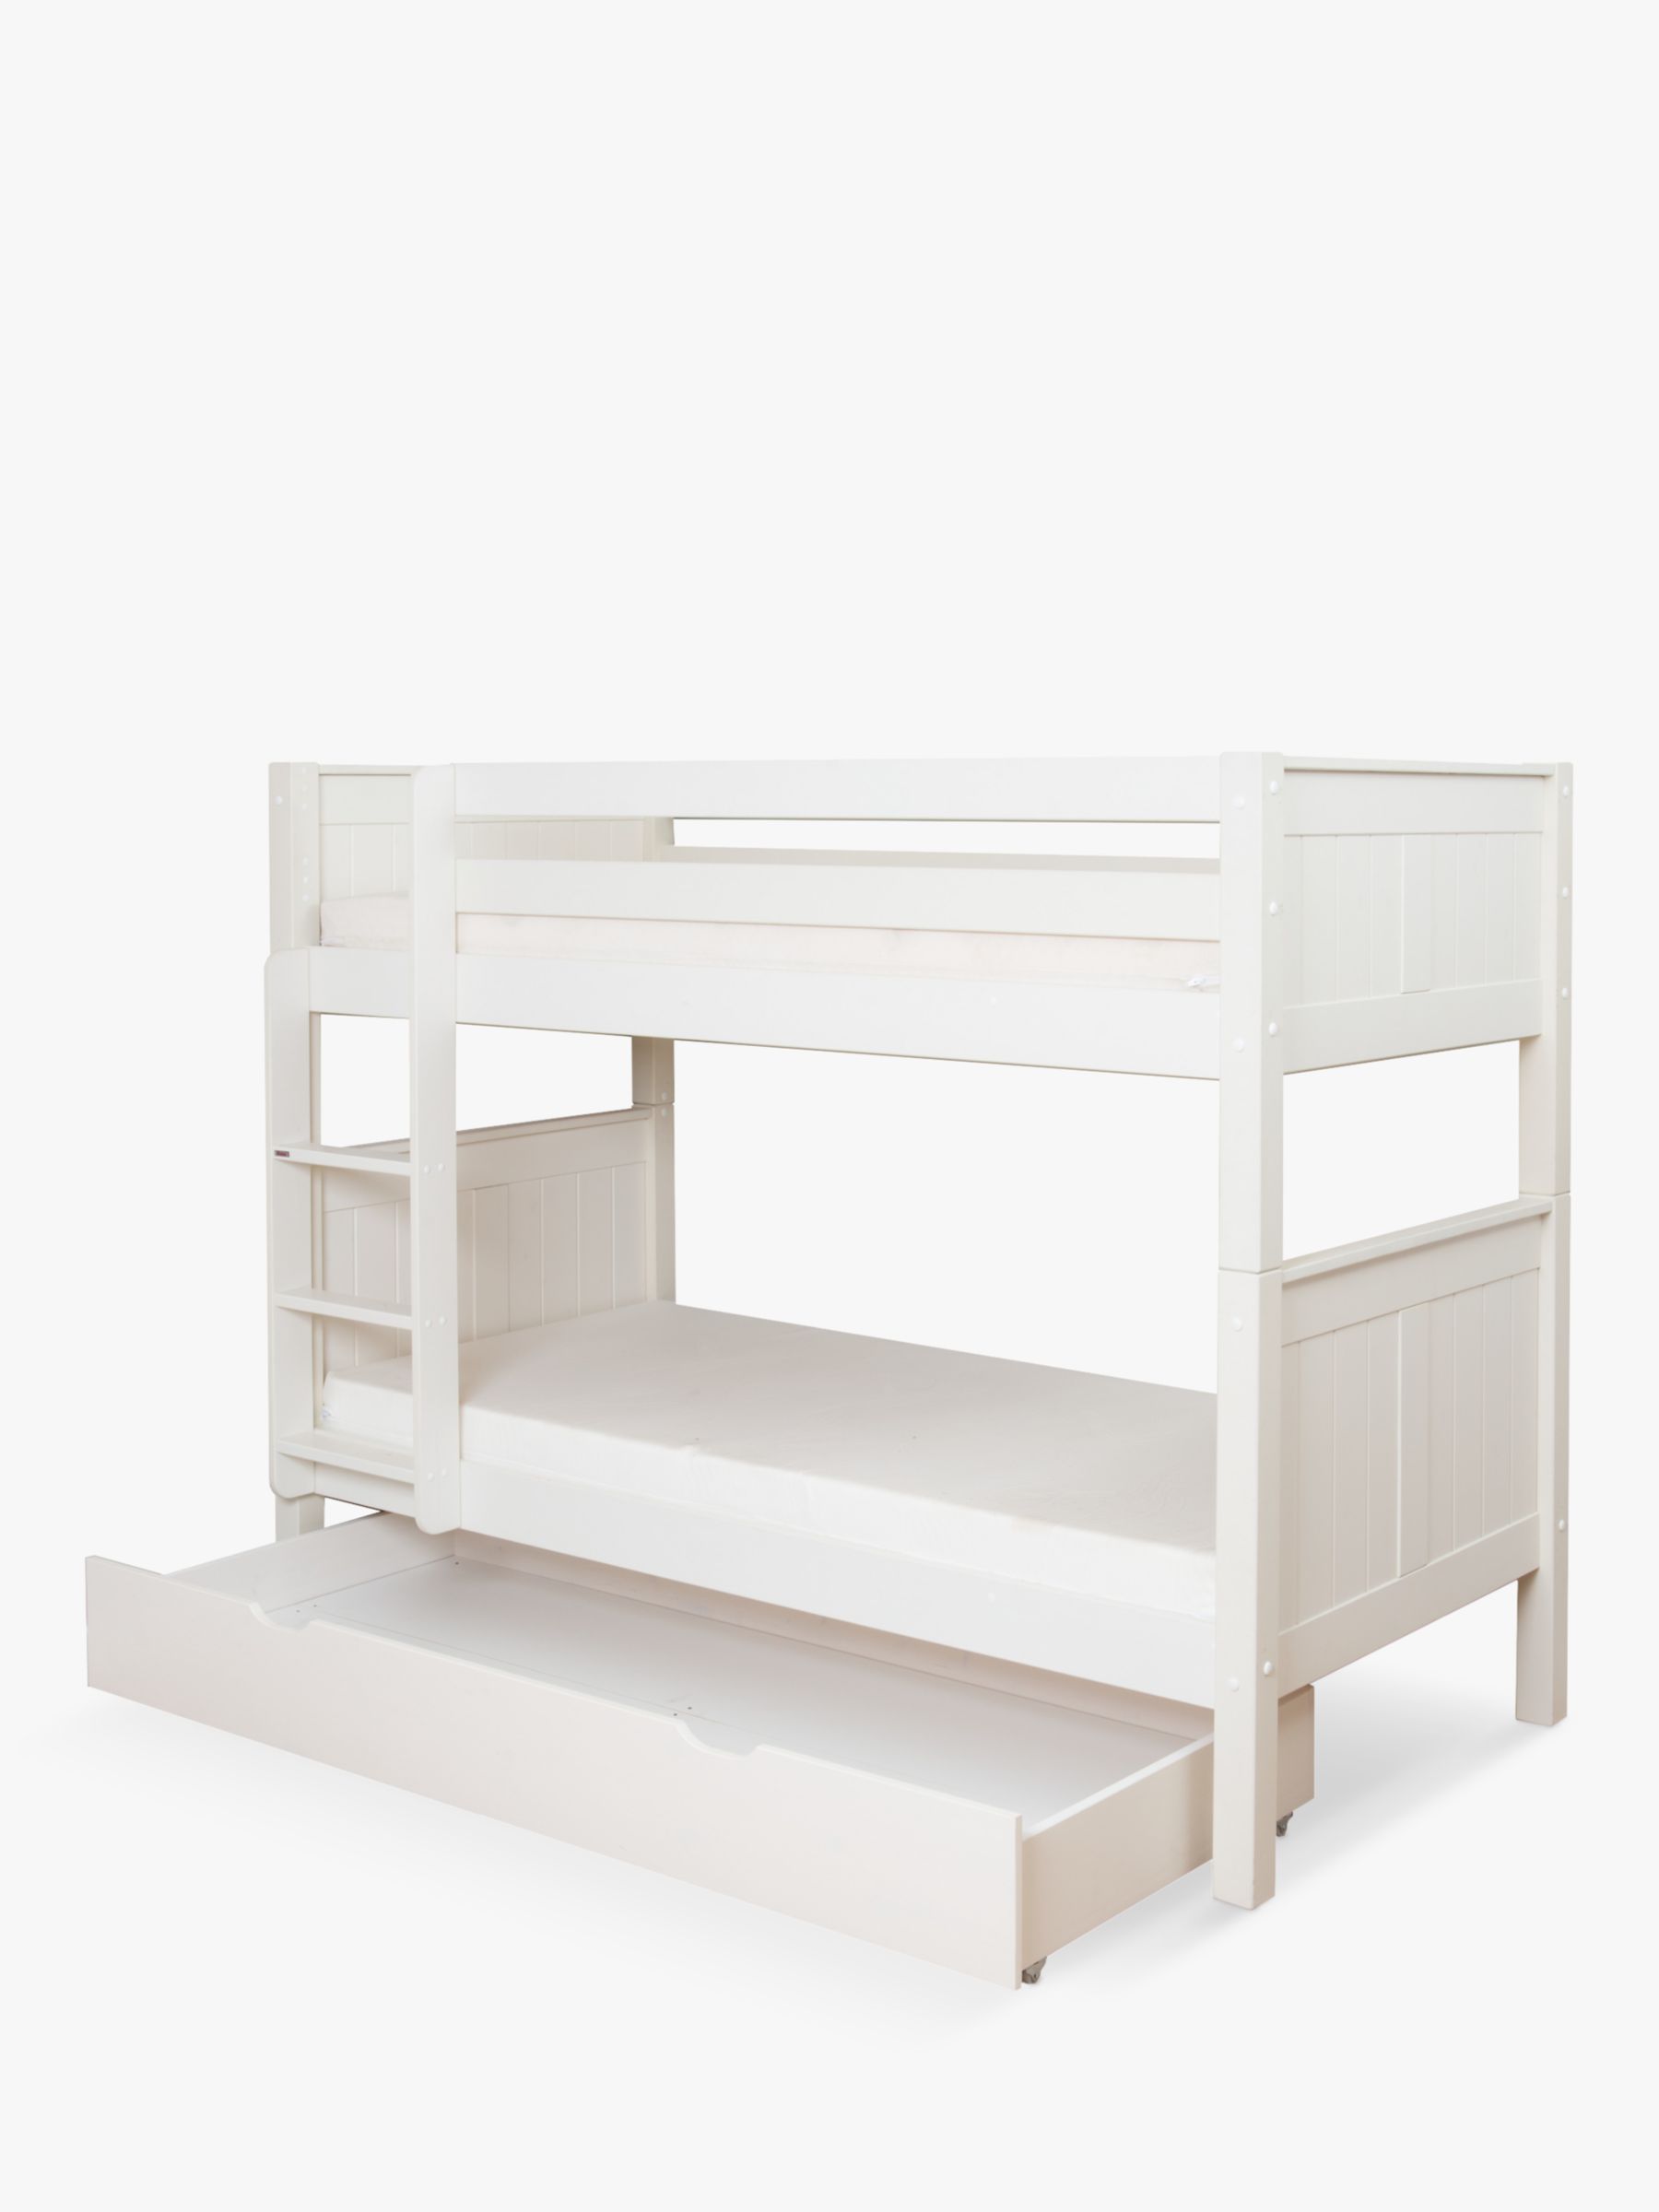 Bunk Beds John Lewis Partners, Bunk Bed With Guest Bed